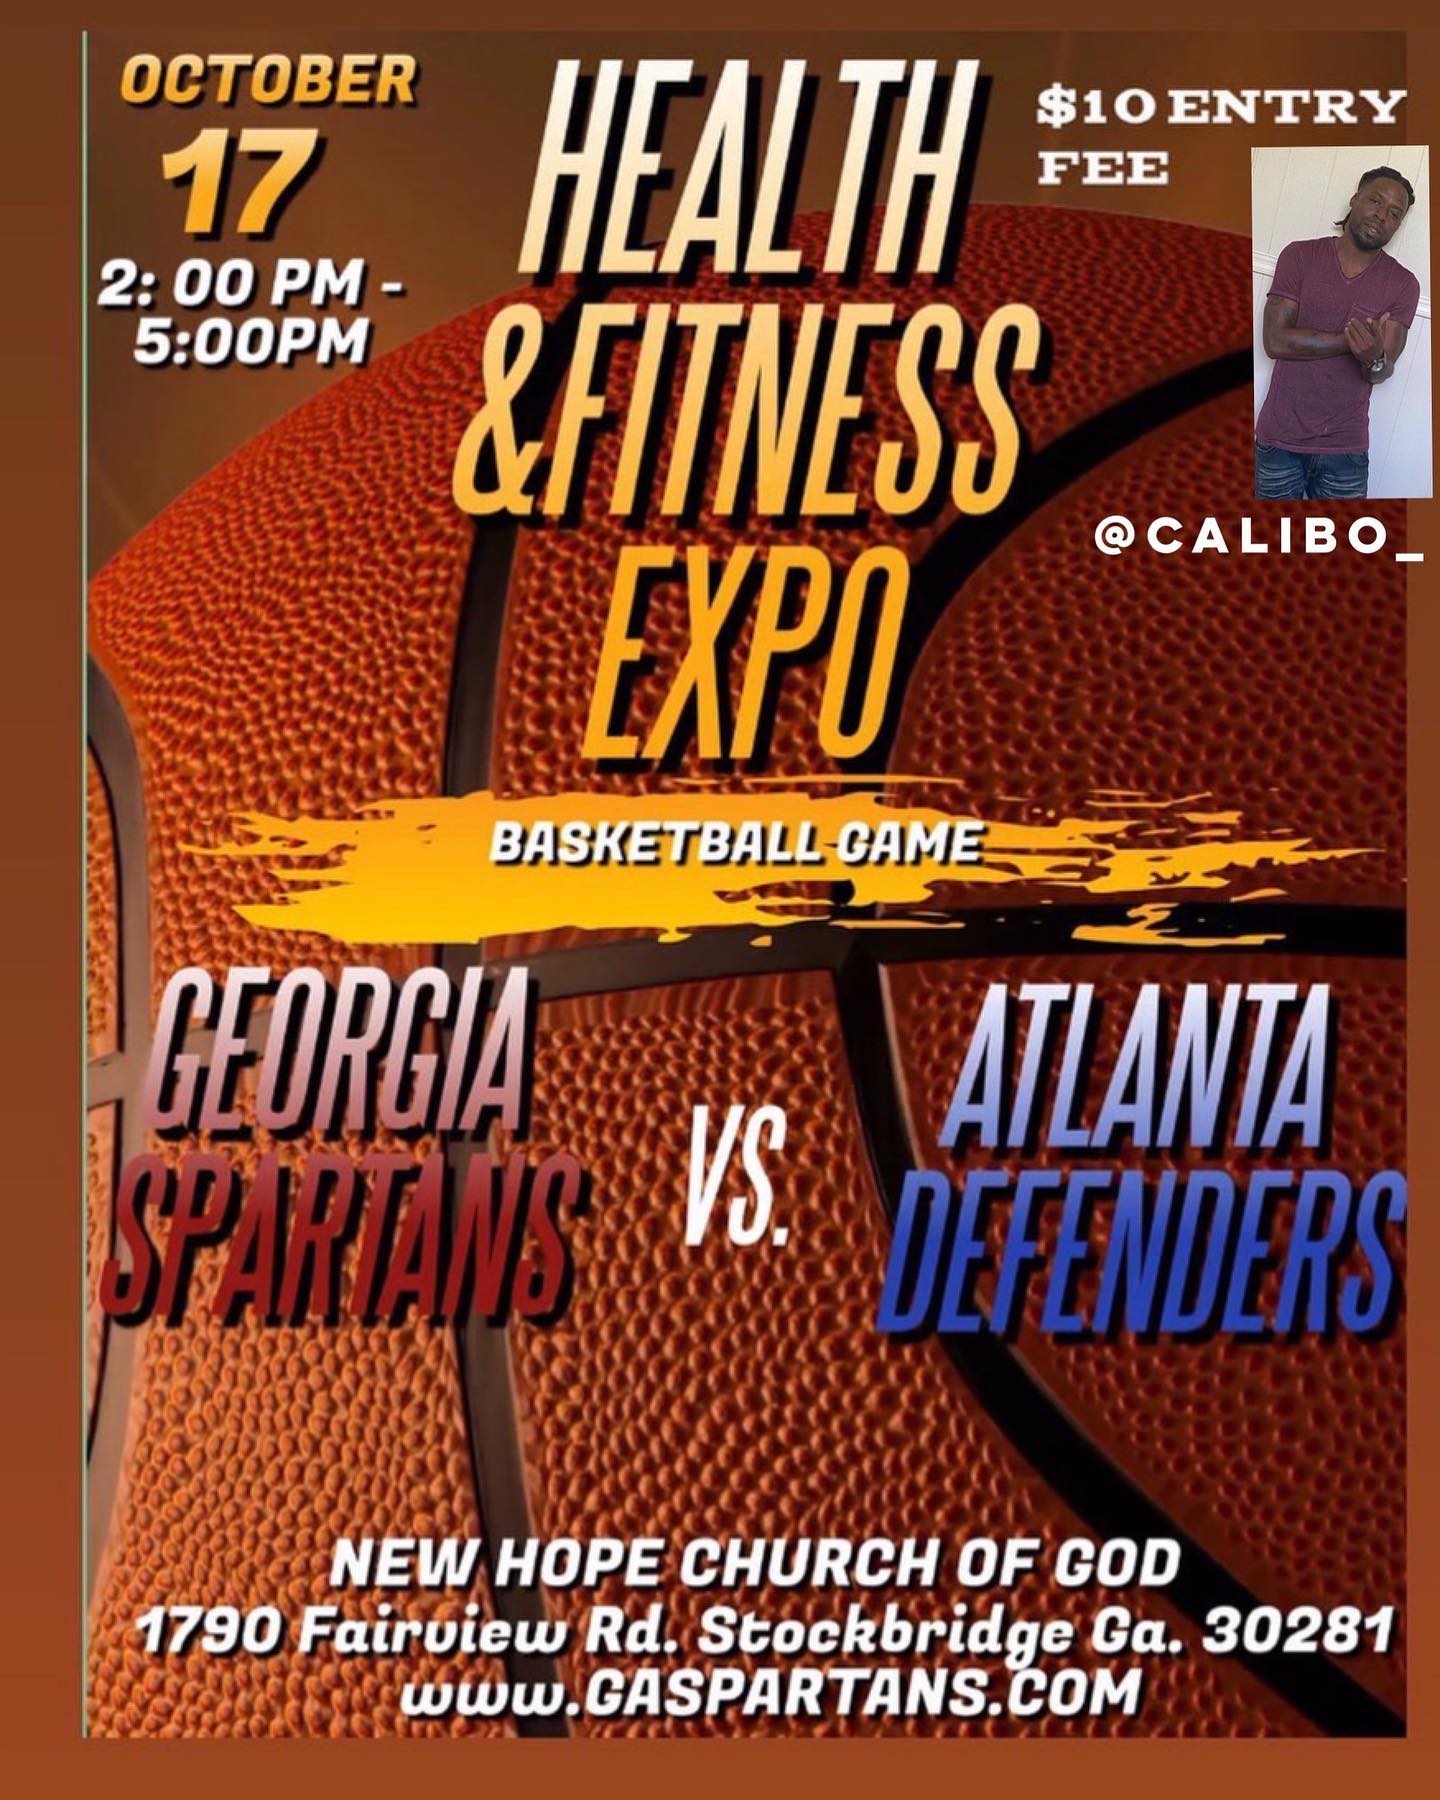 @calibo__ will be hosting on Oct. 17 2pm to 5pm Health&Fitness Expo Basketball Game. New Hope Church of God 1790 Fairview Rd. St